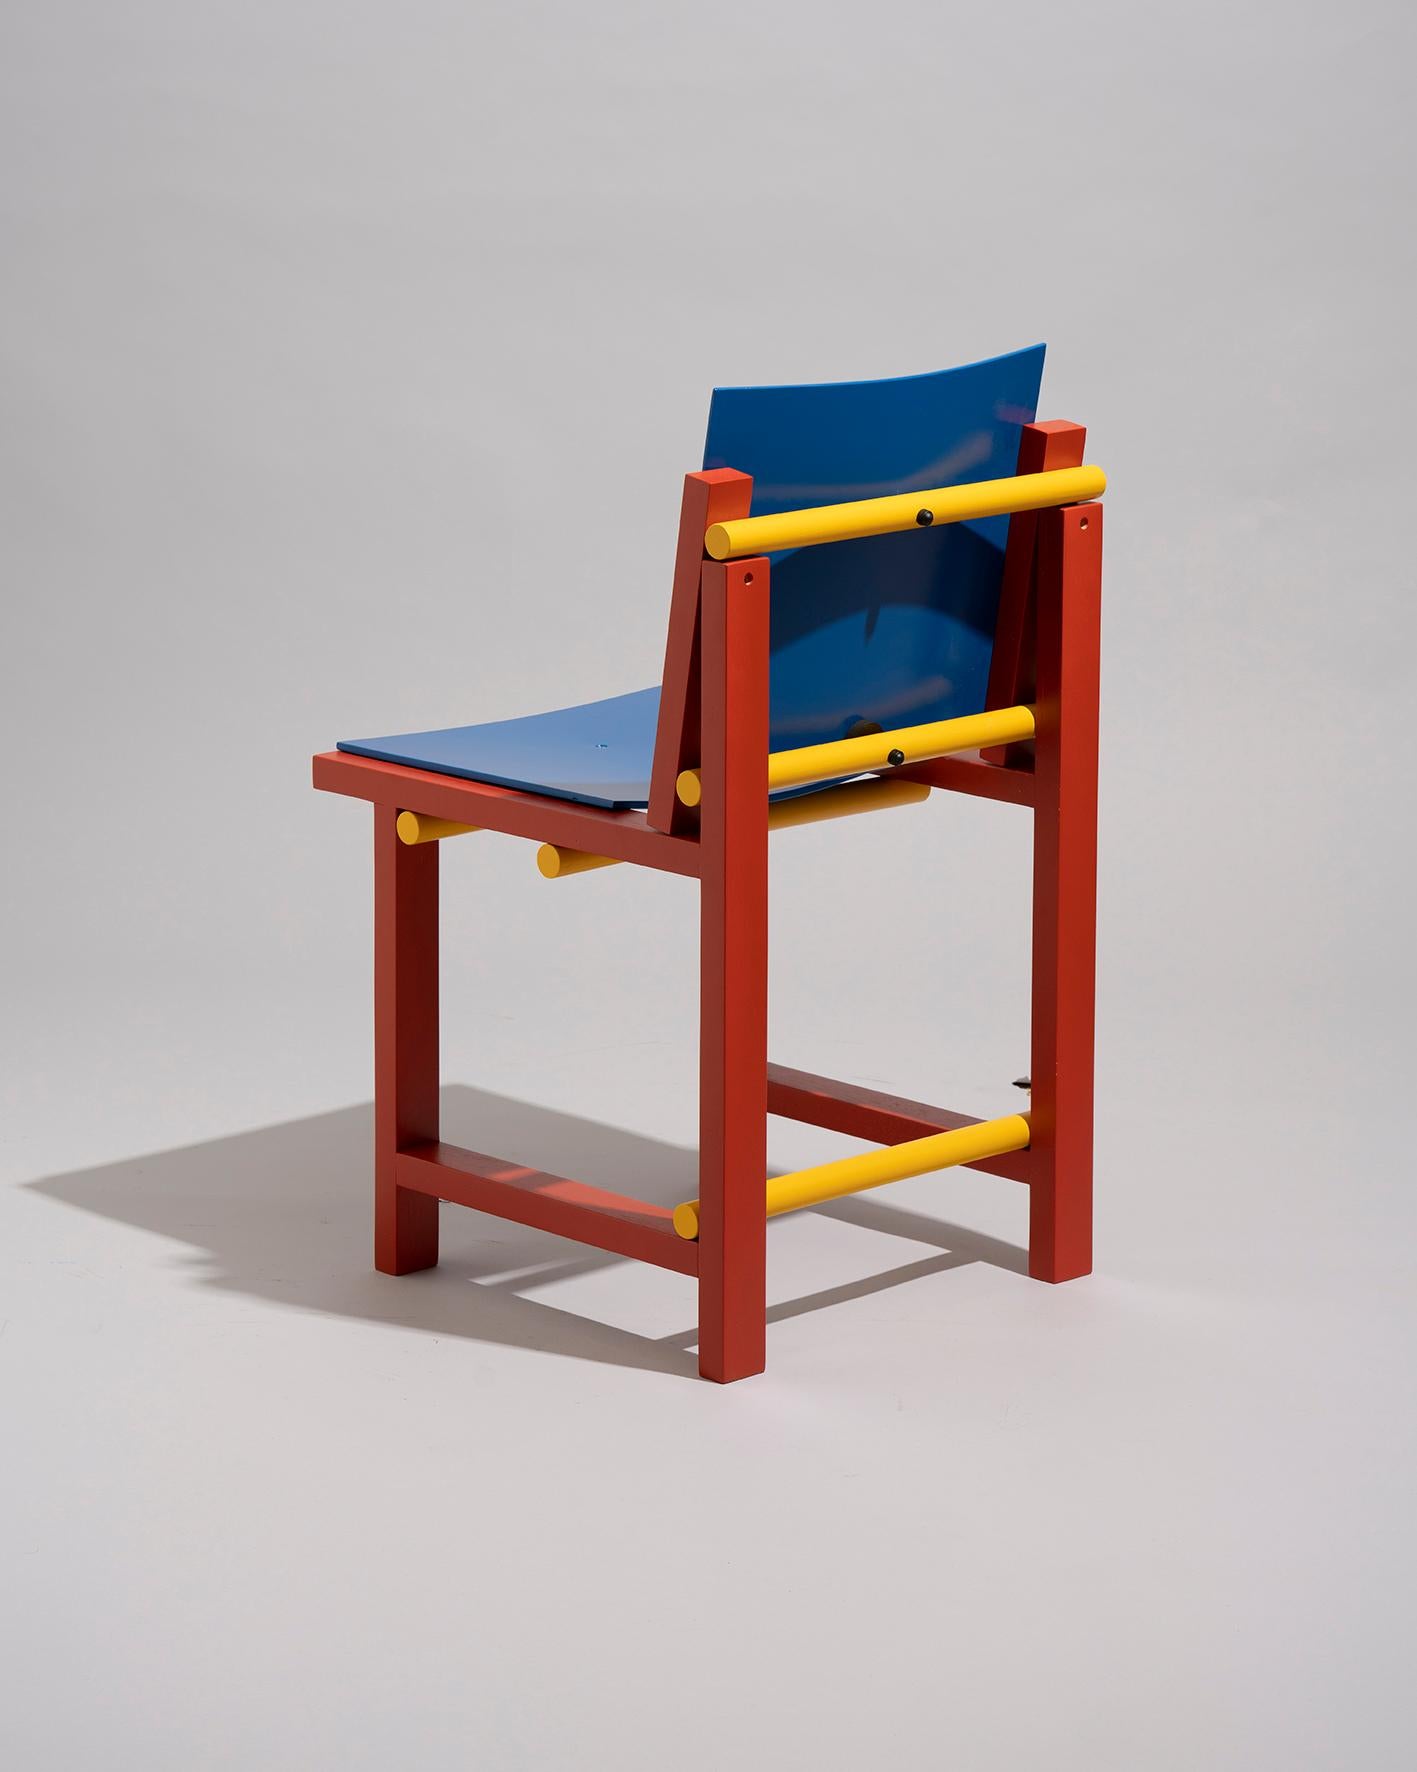 Lacquered Modern contemporary chair in red blue yellow wood by Marc Morro  For Sale